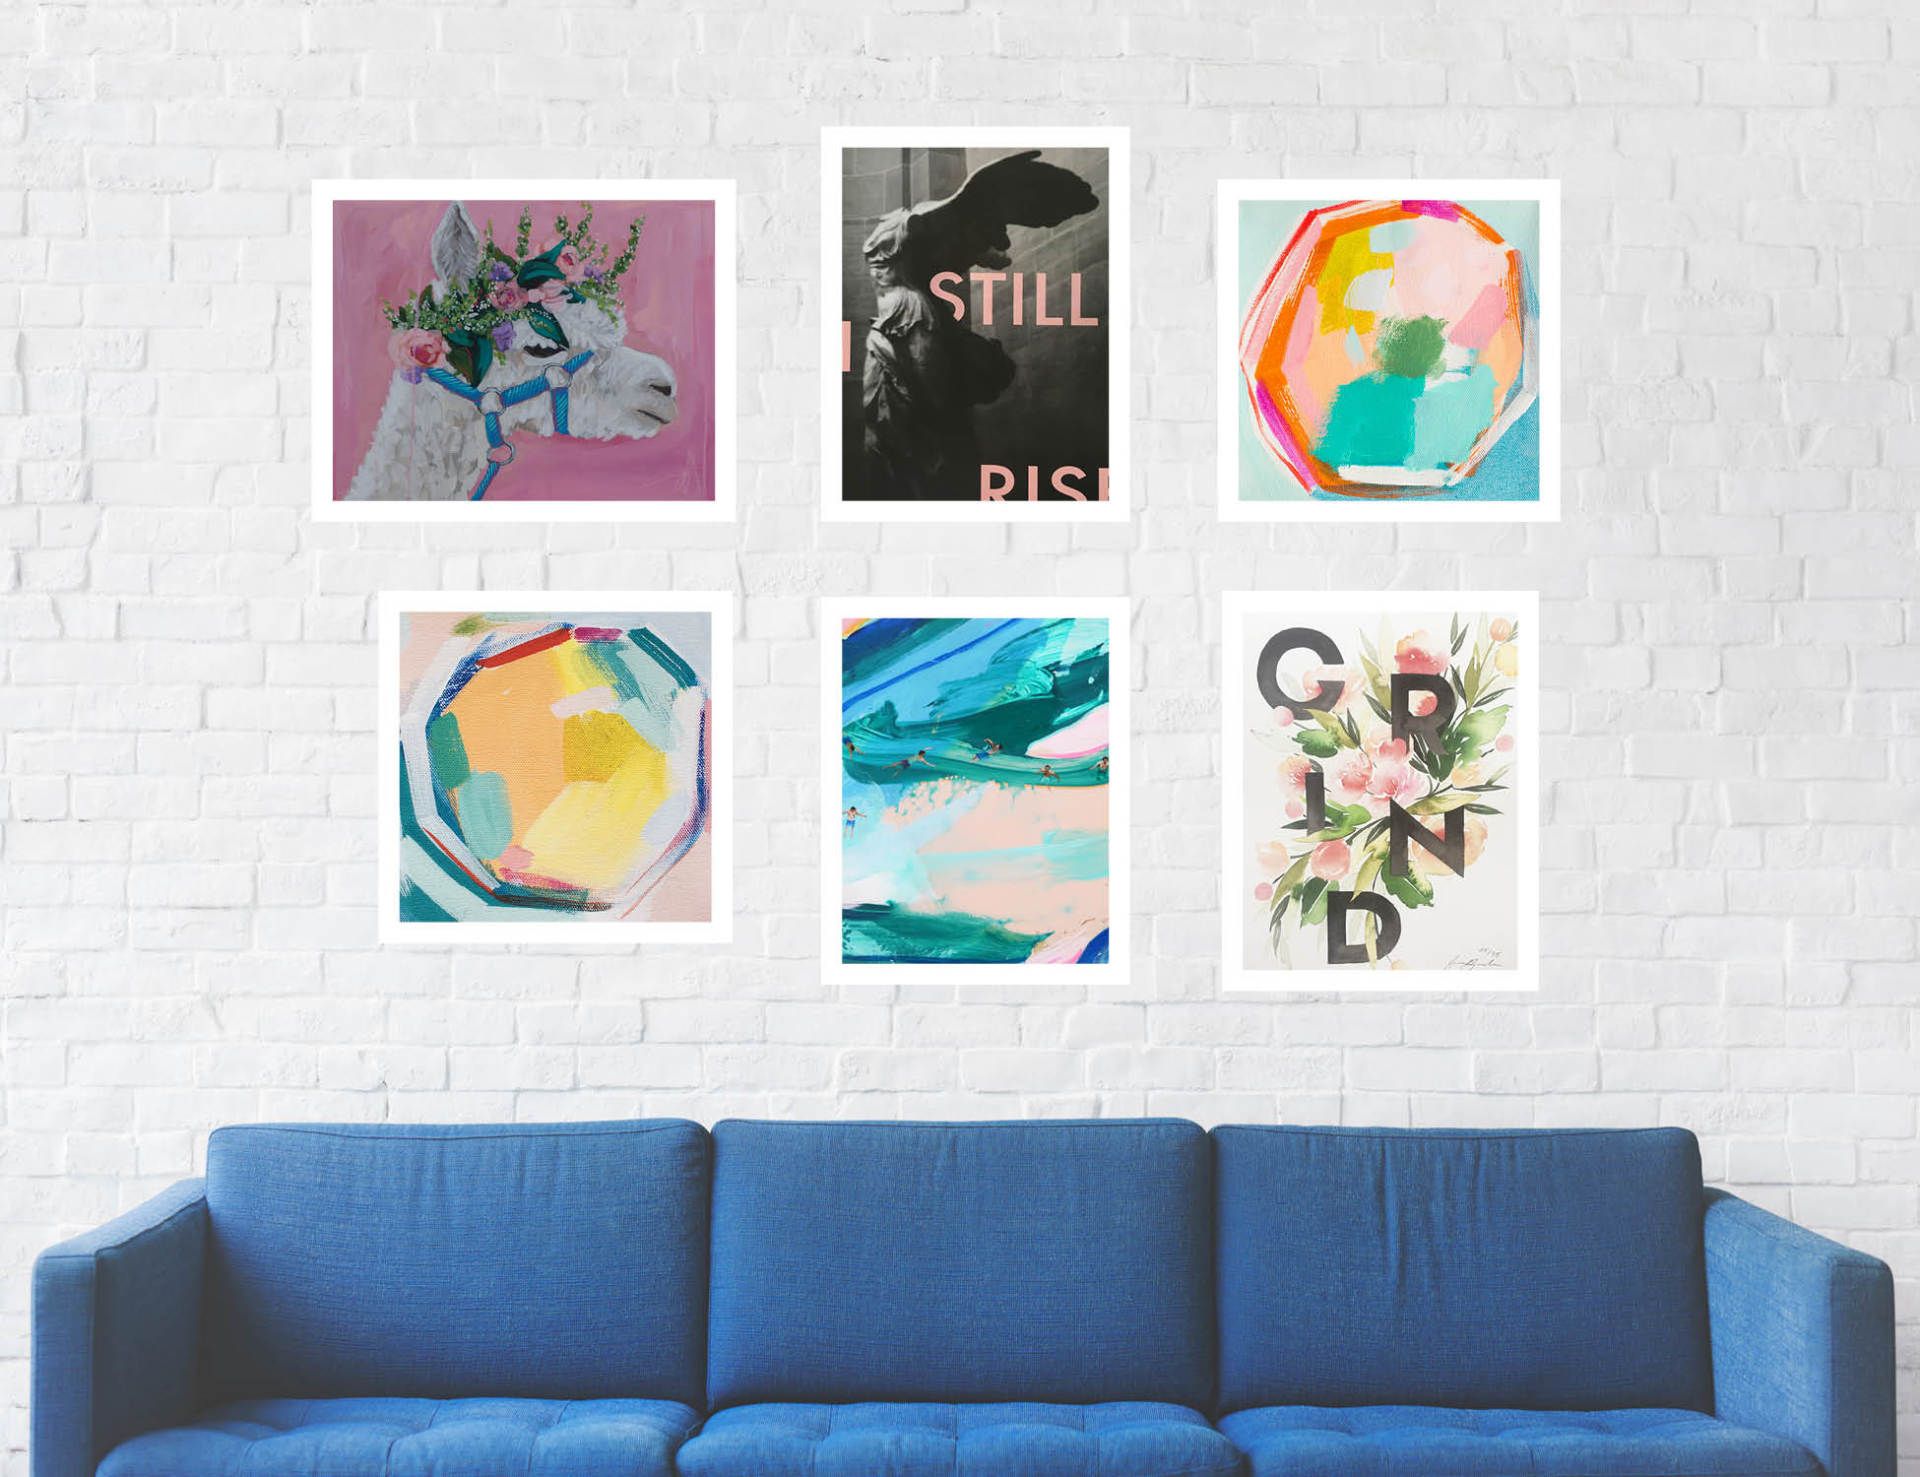 Gallery wall package #2